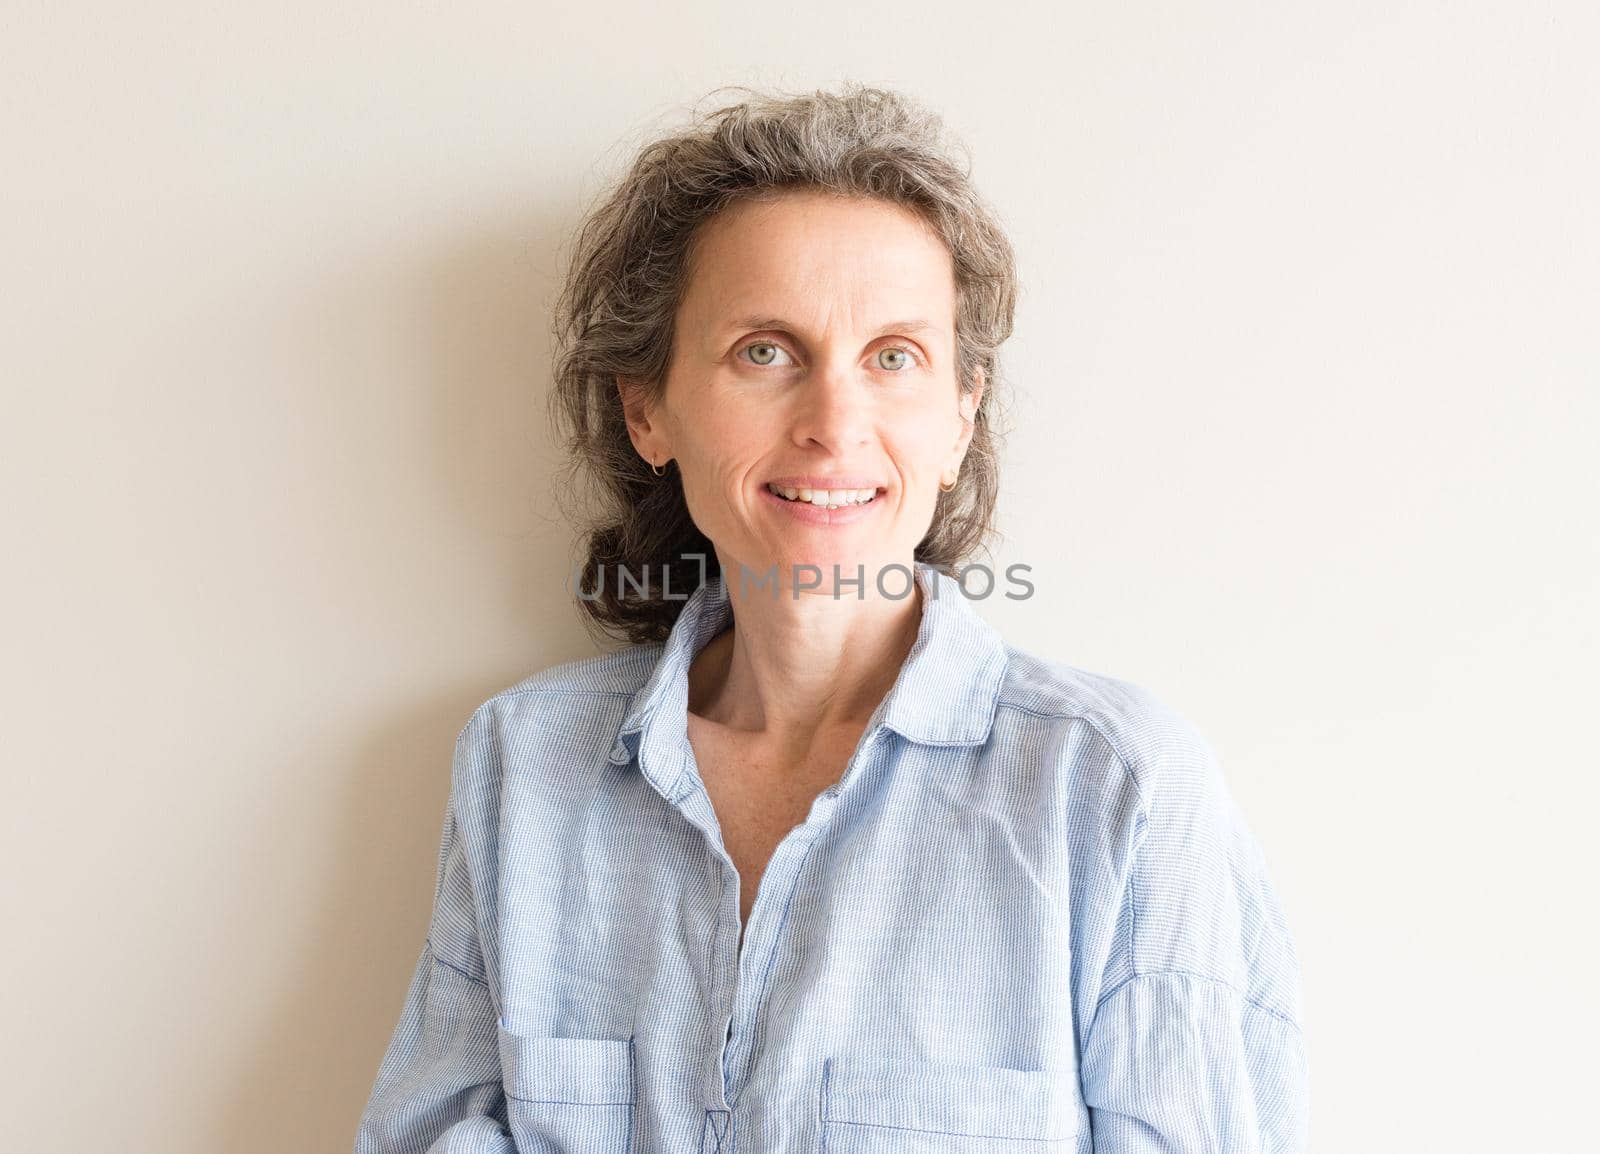 Natural looking middle aged woman with grey hair and blue shirt smiling